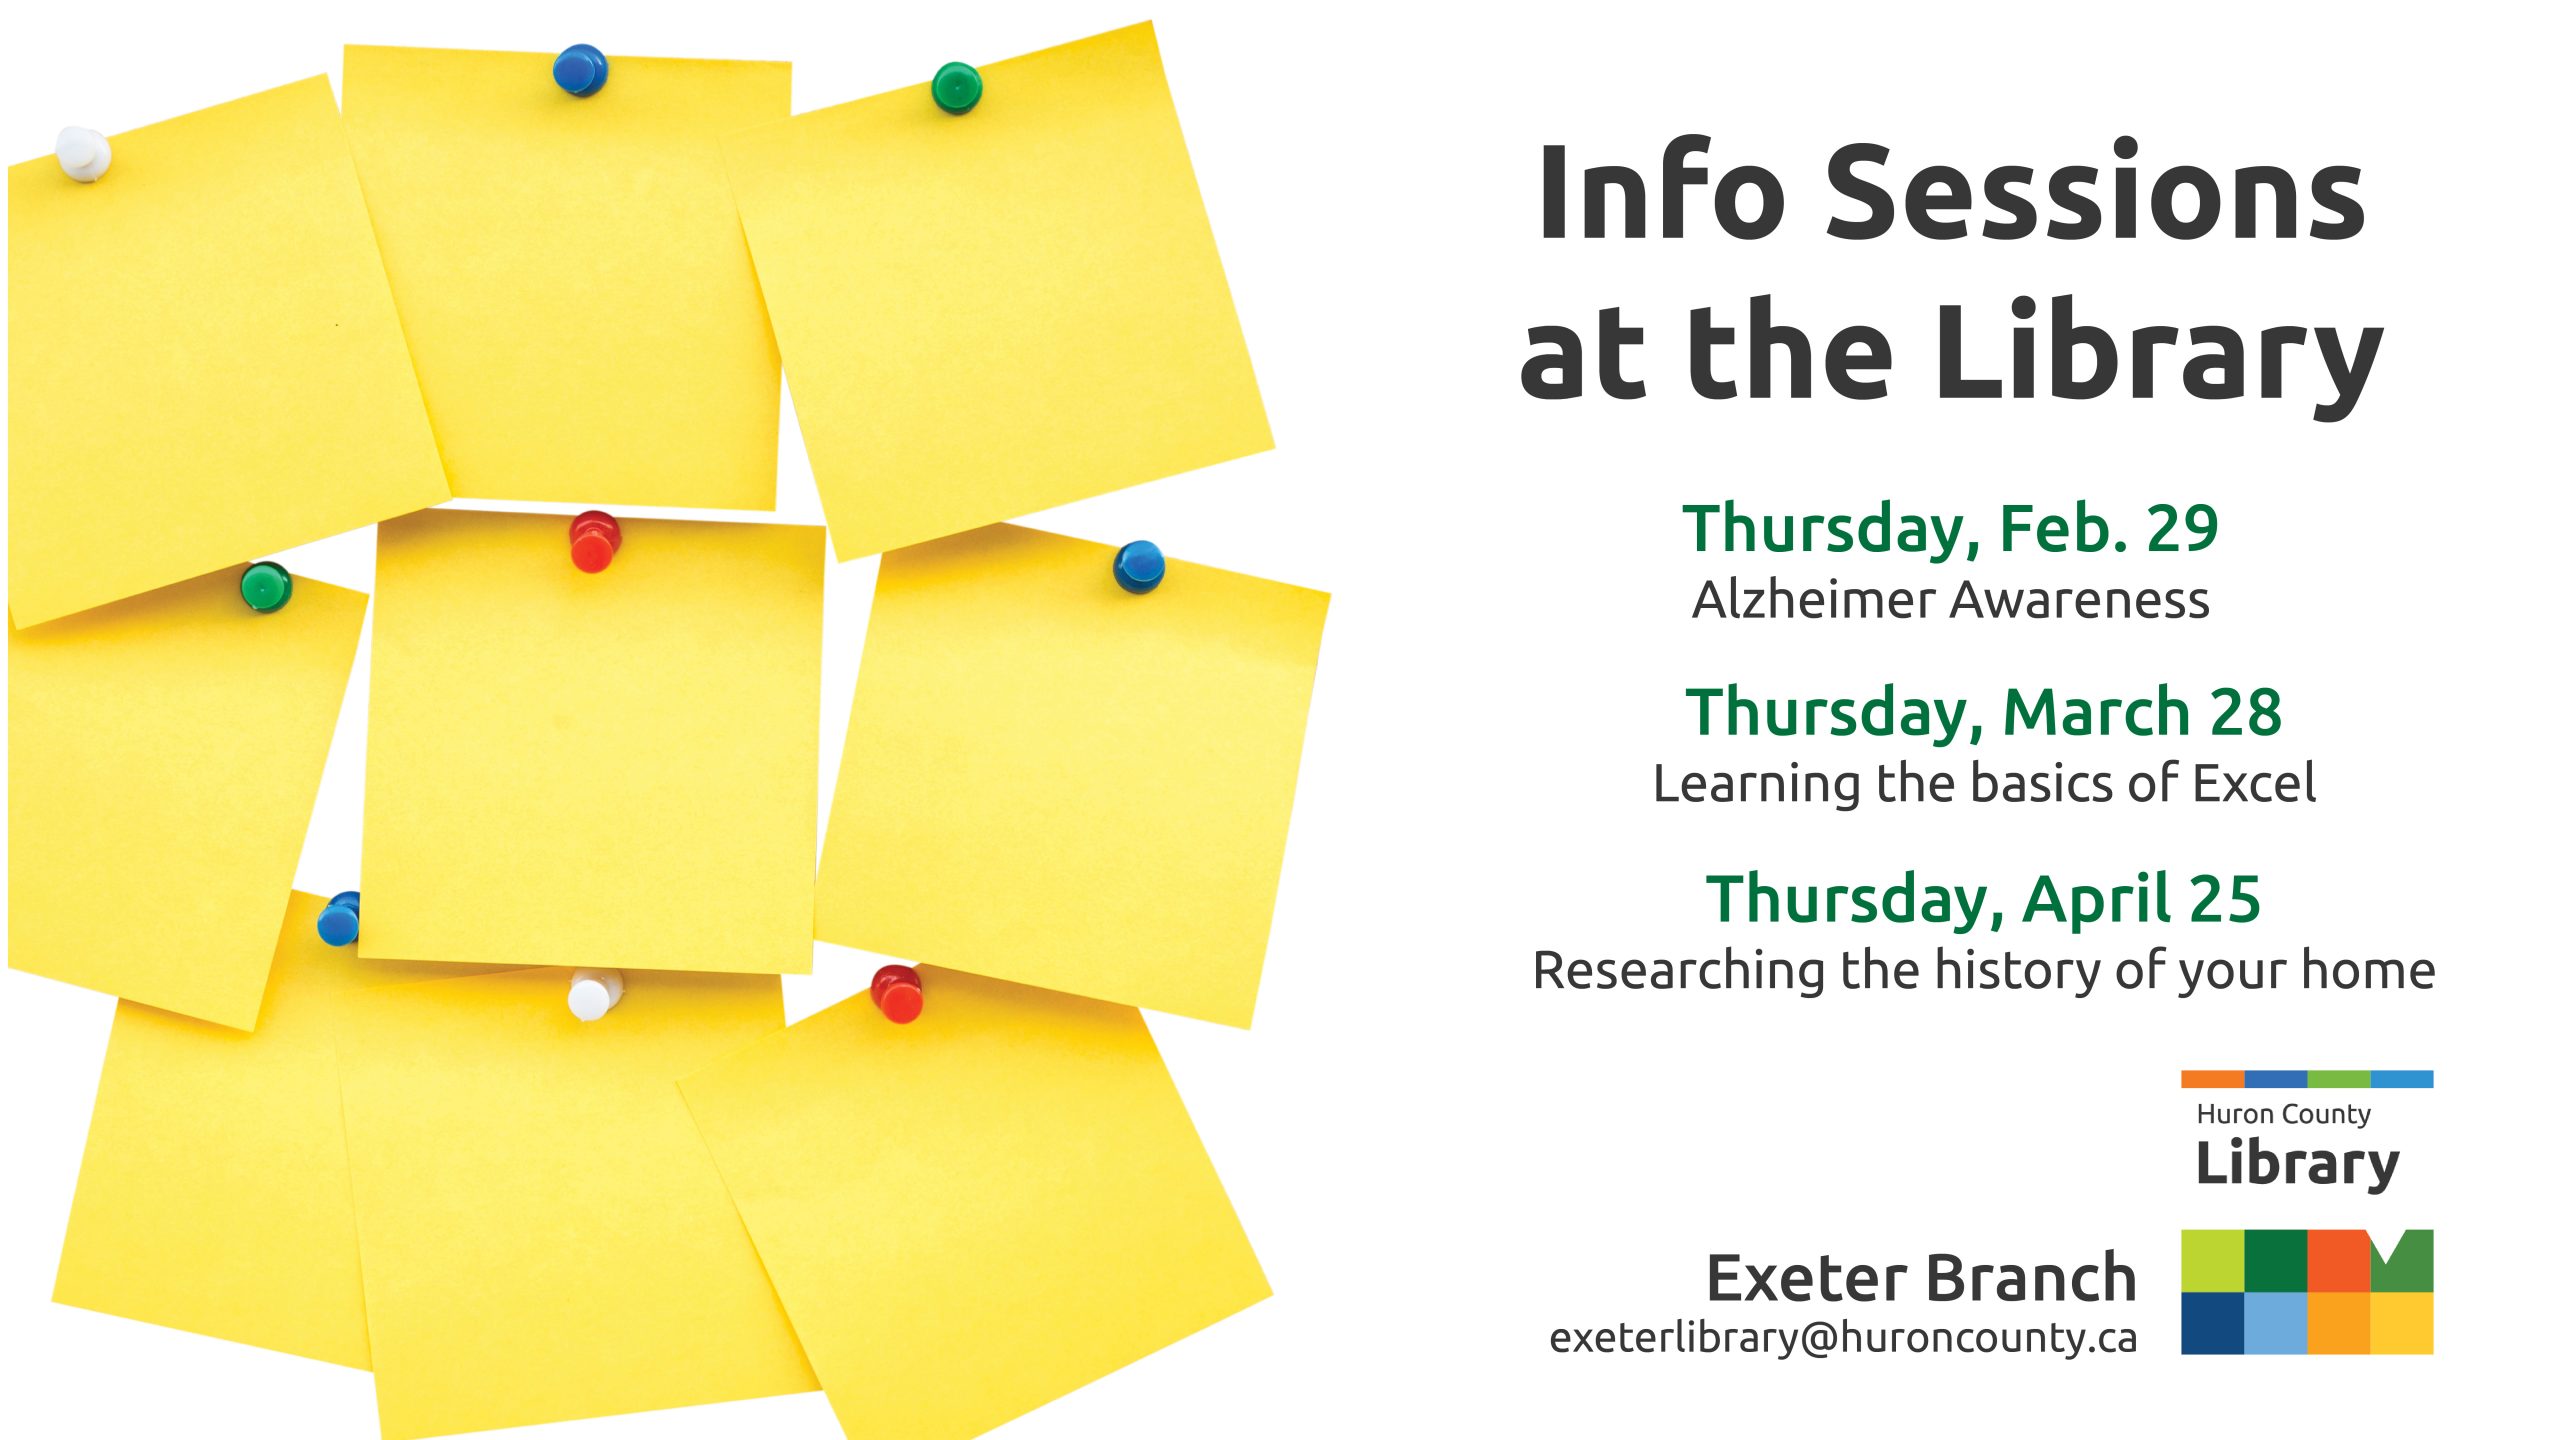 Photo of yellow post-it notes thumbtacked to the wall with text promoting information sessions at the Exeter branch